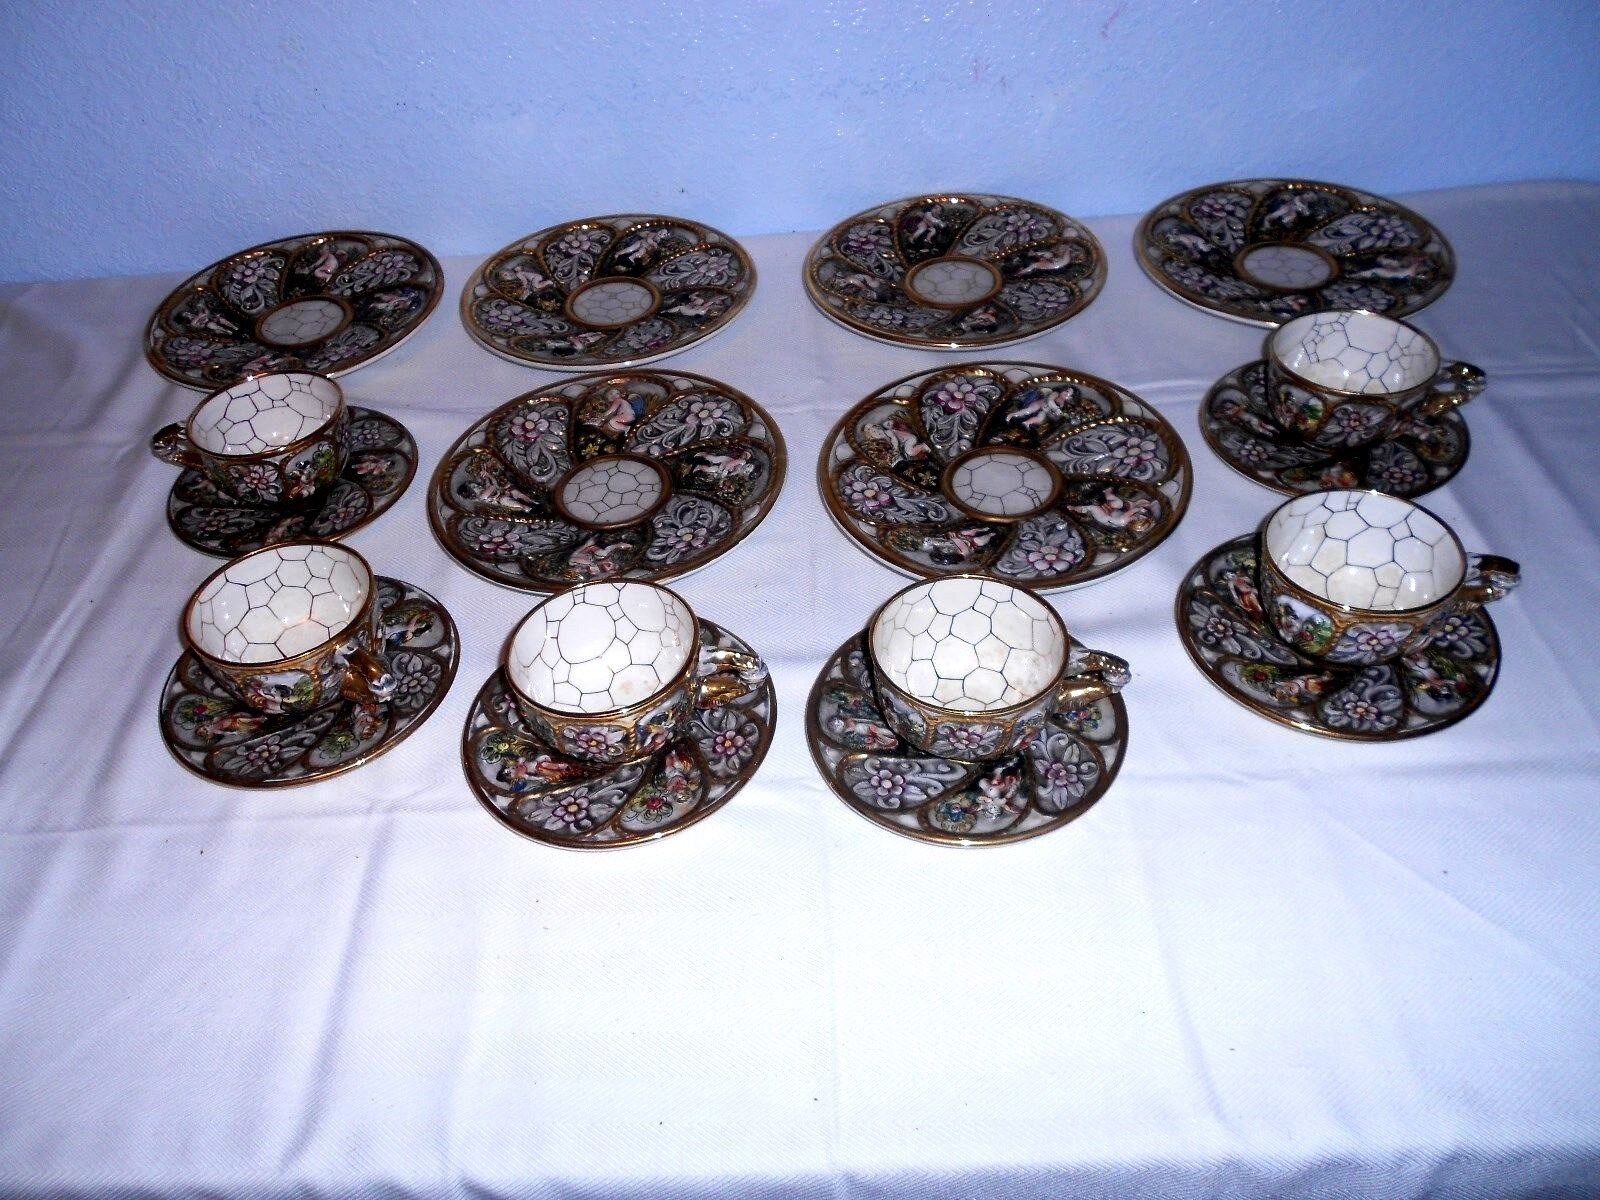 Atq. Capodimonte Cup, Saucer & Plate Set(s) Handpainted Embossed Figures 18 Pcs.